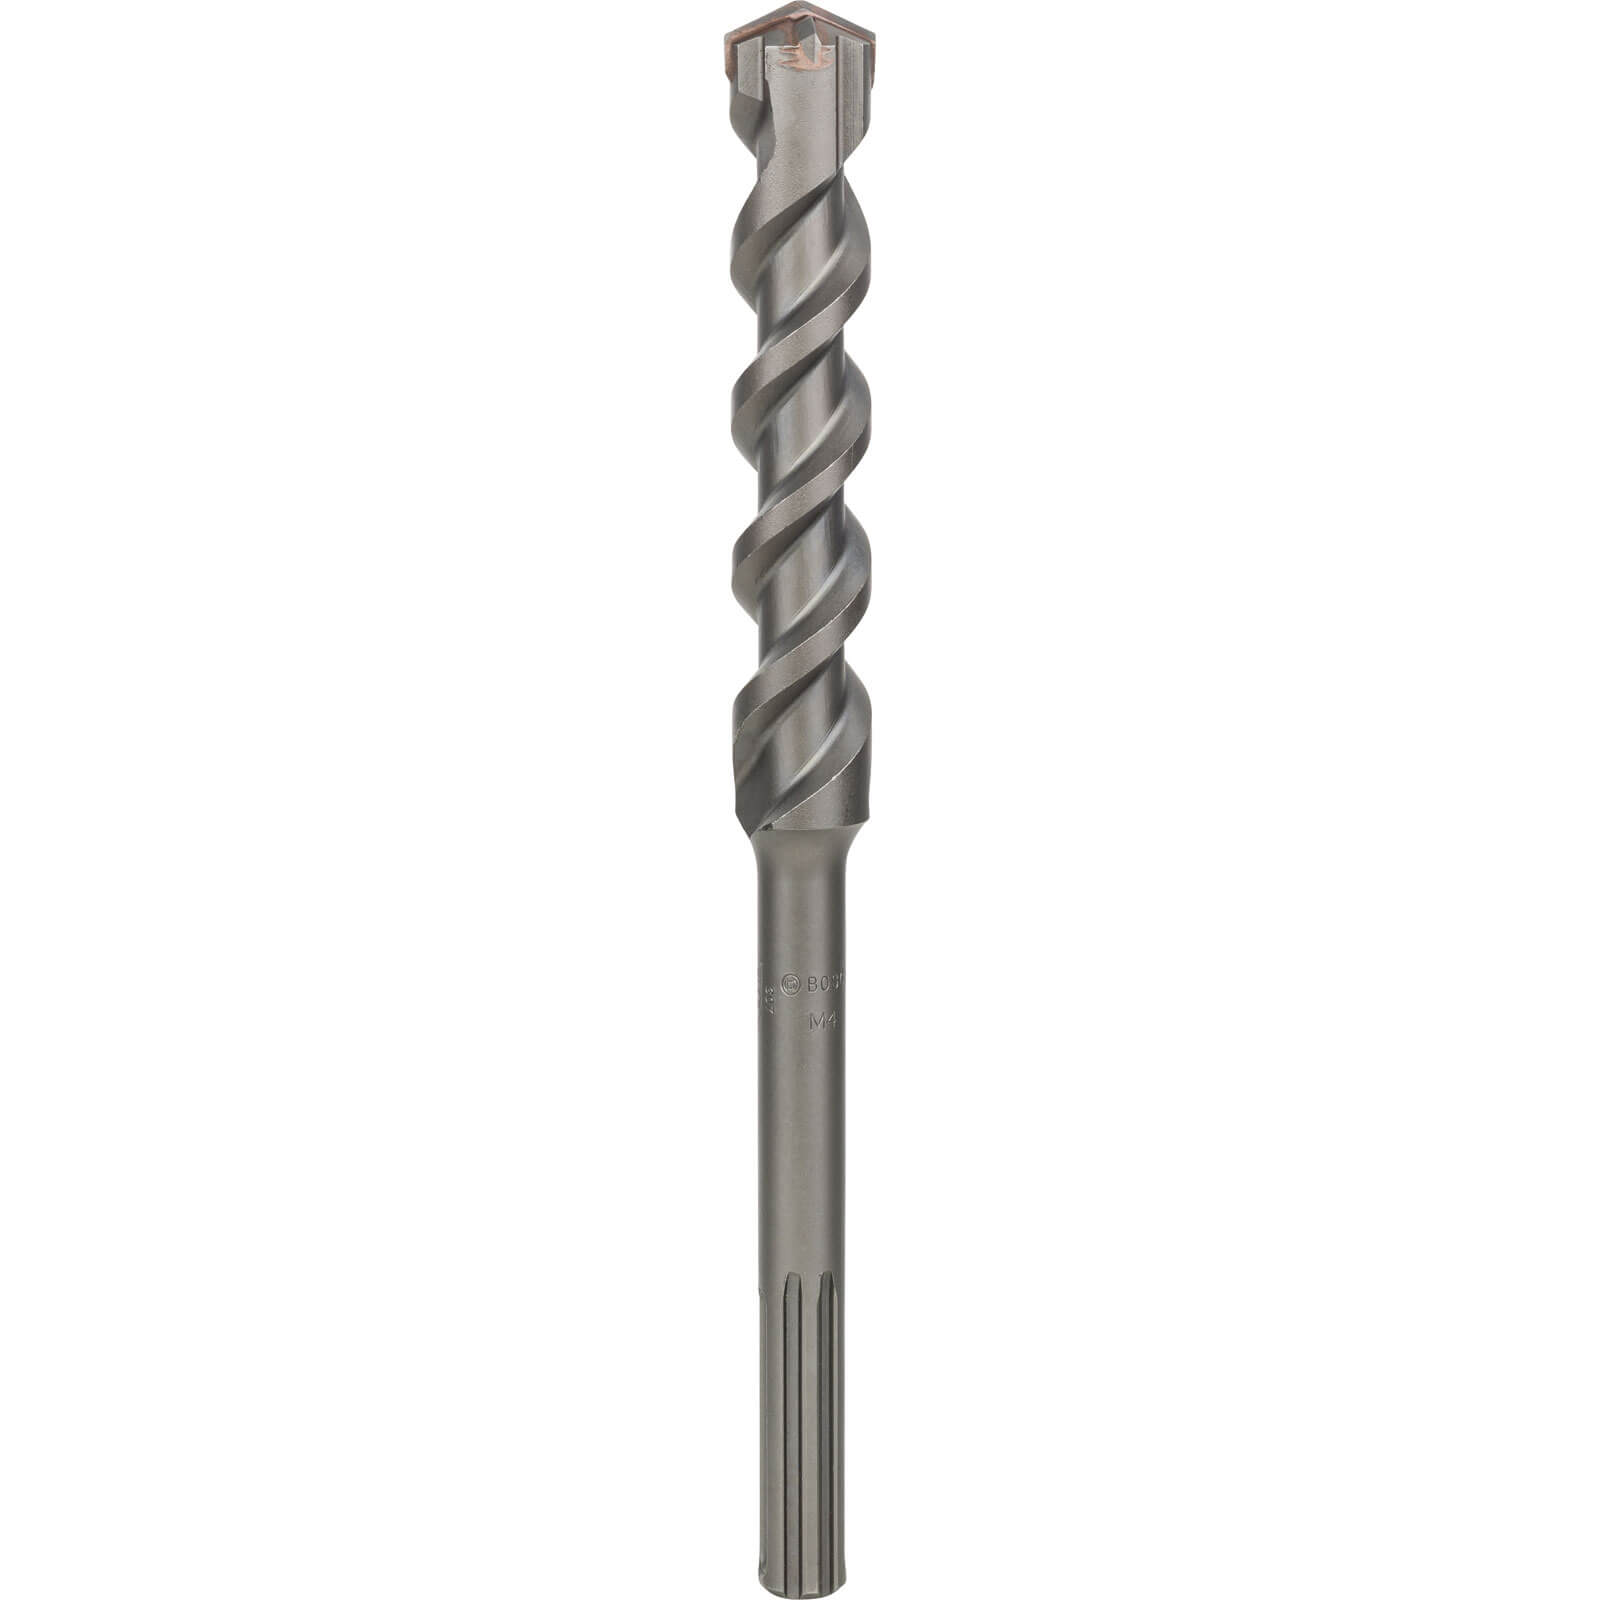 Image of Bosch M4 SDS Max Masonry Drill Bit 30mm 320mm Pack of 1